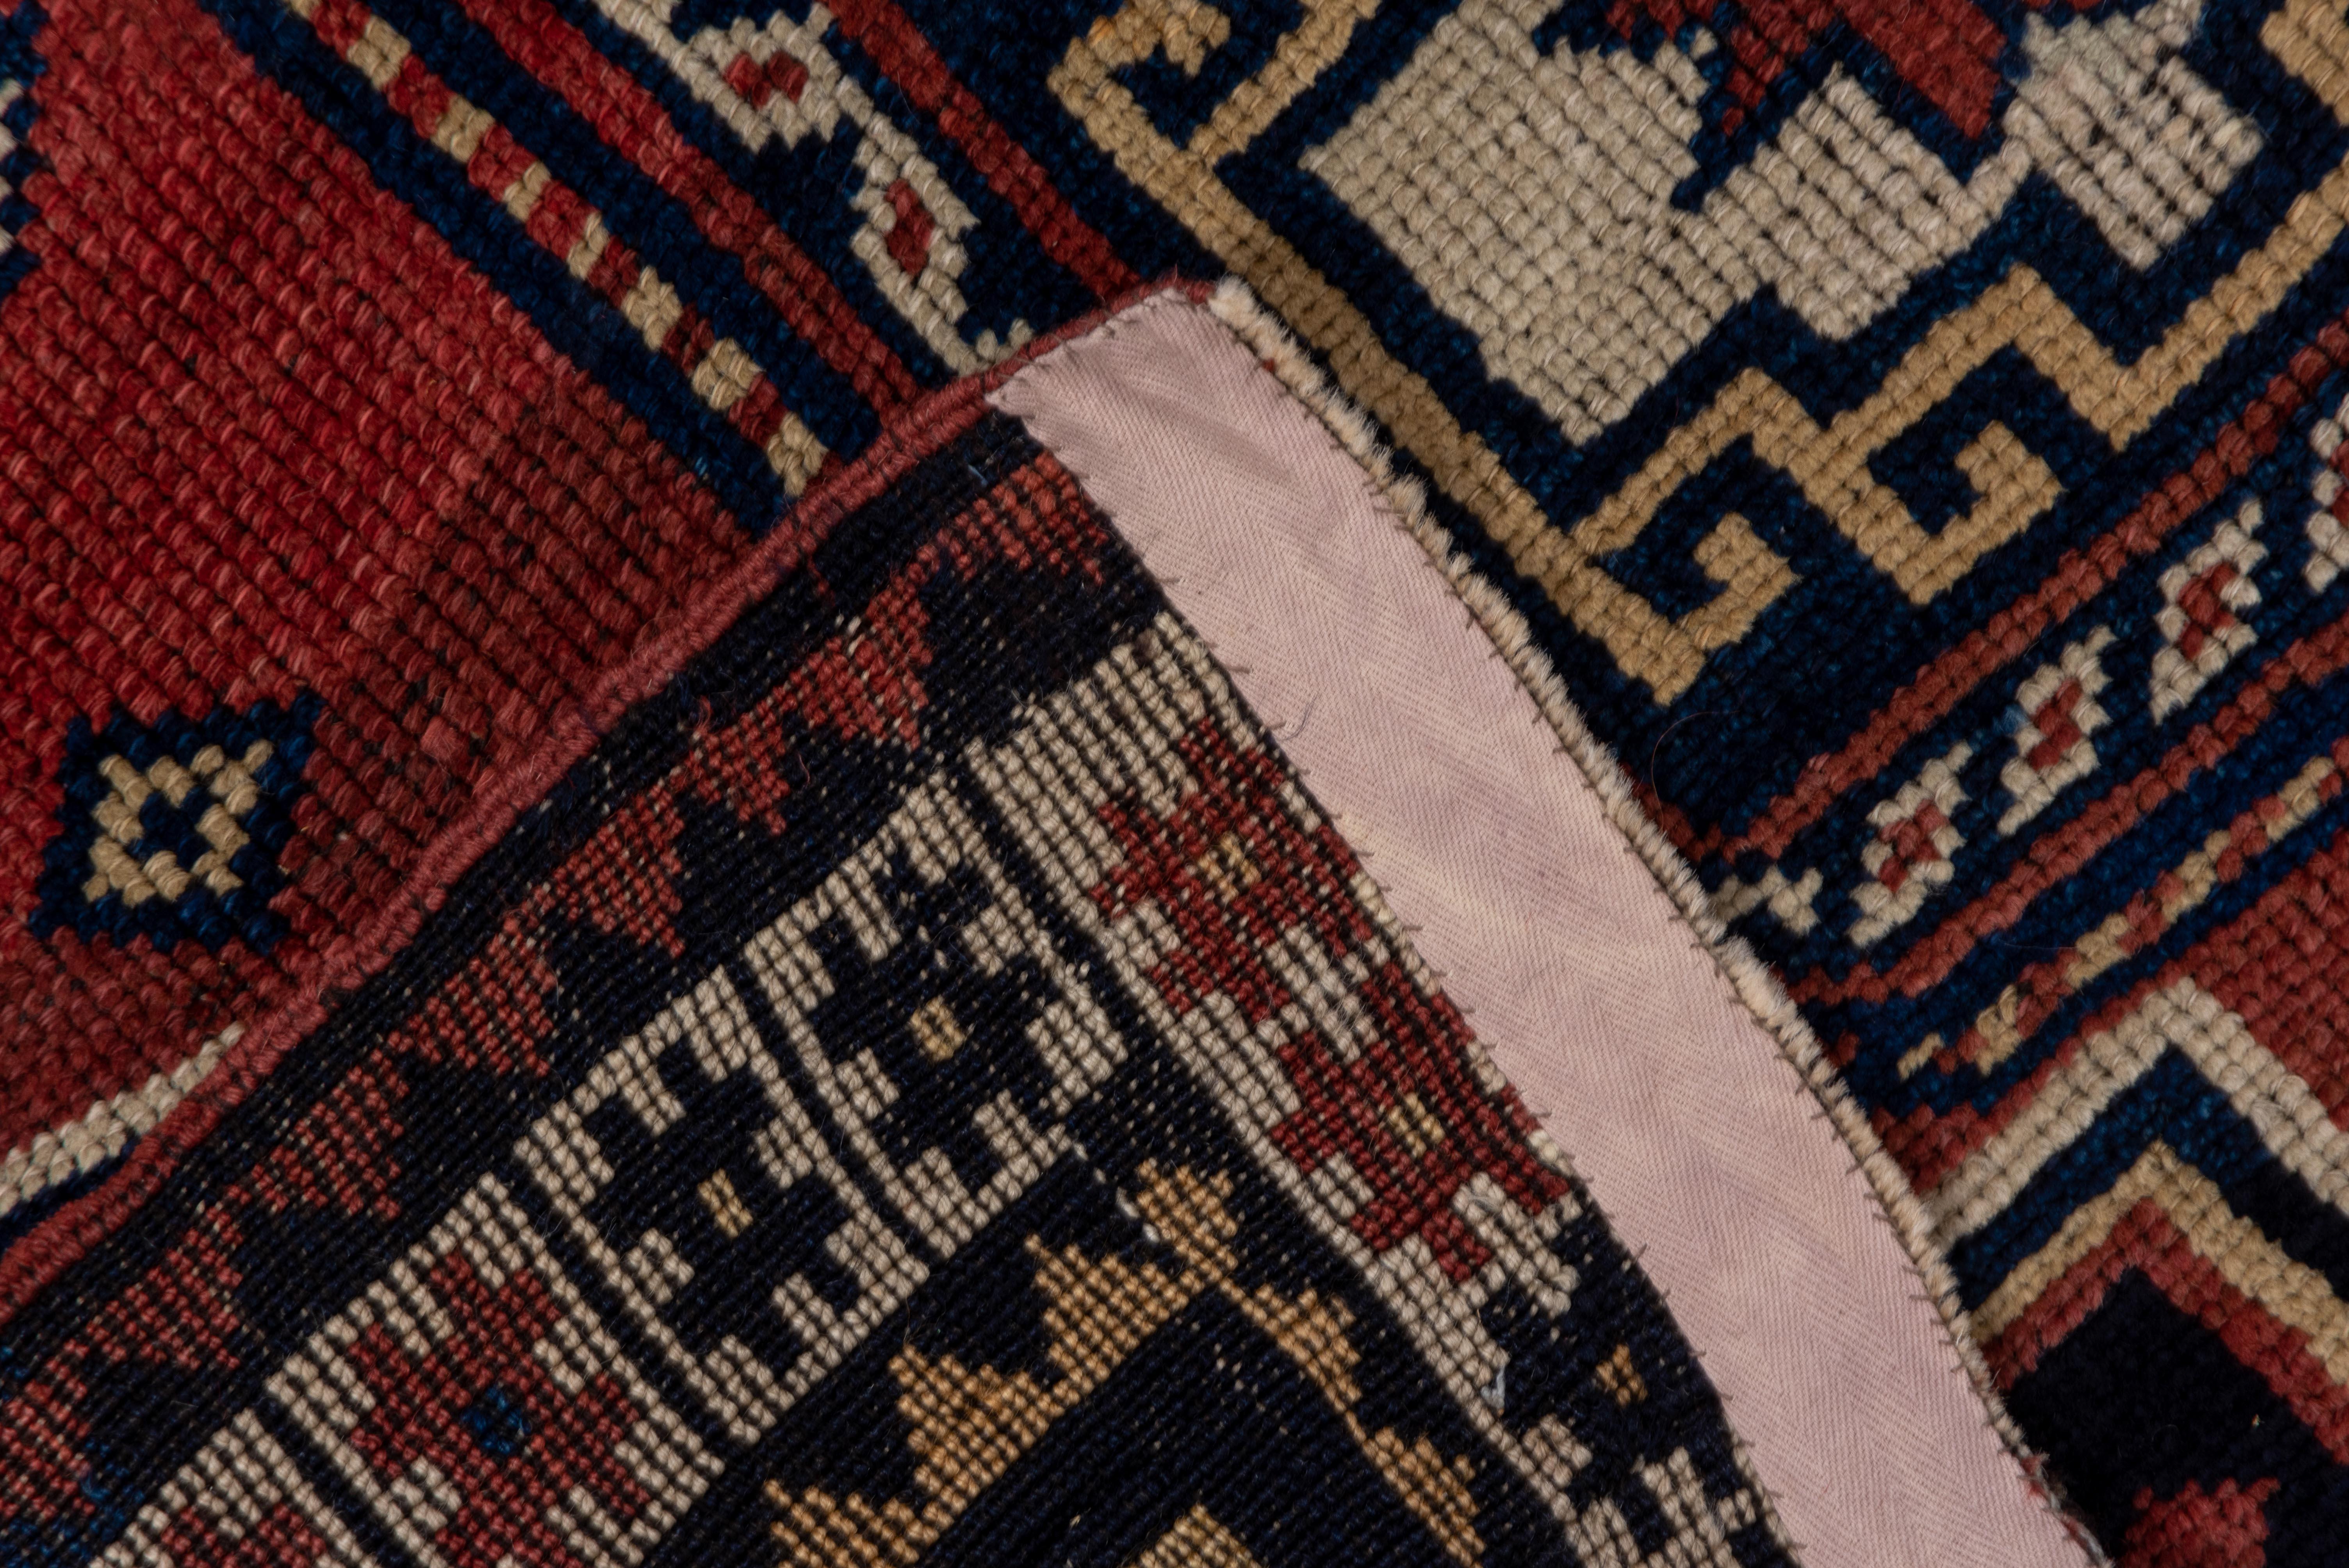 Transcaucasian Tribal Antique Rug - 1910 In Good Condition For Sale In New York, NY